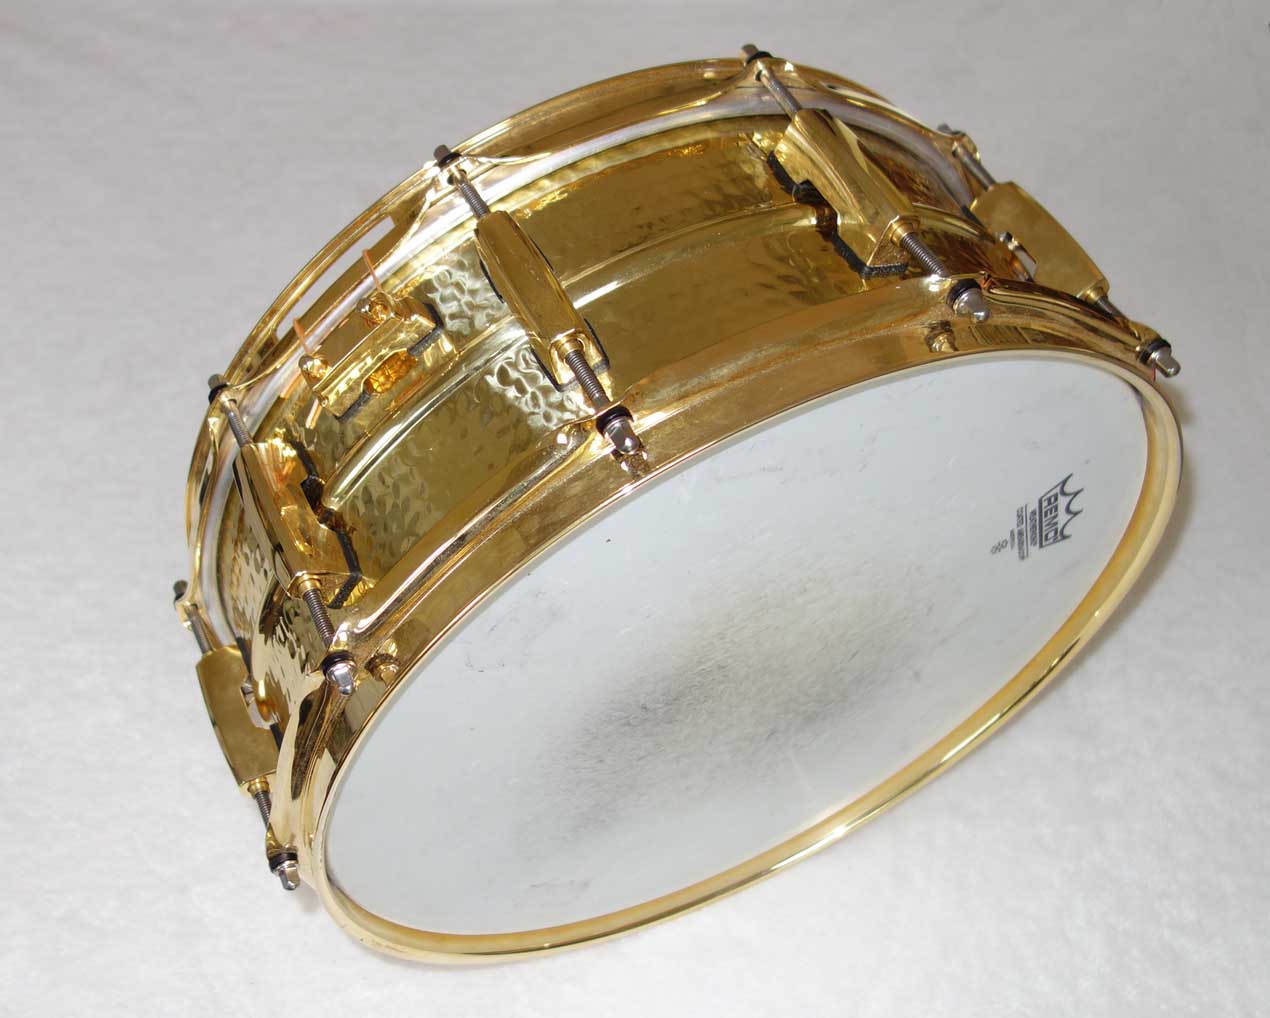 Pearl JD1455 Gold-Hammered Jimmy DeGrasso Signature Snare 14" x 5.5"